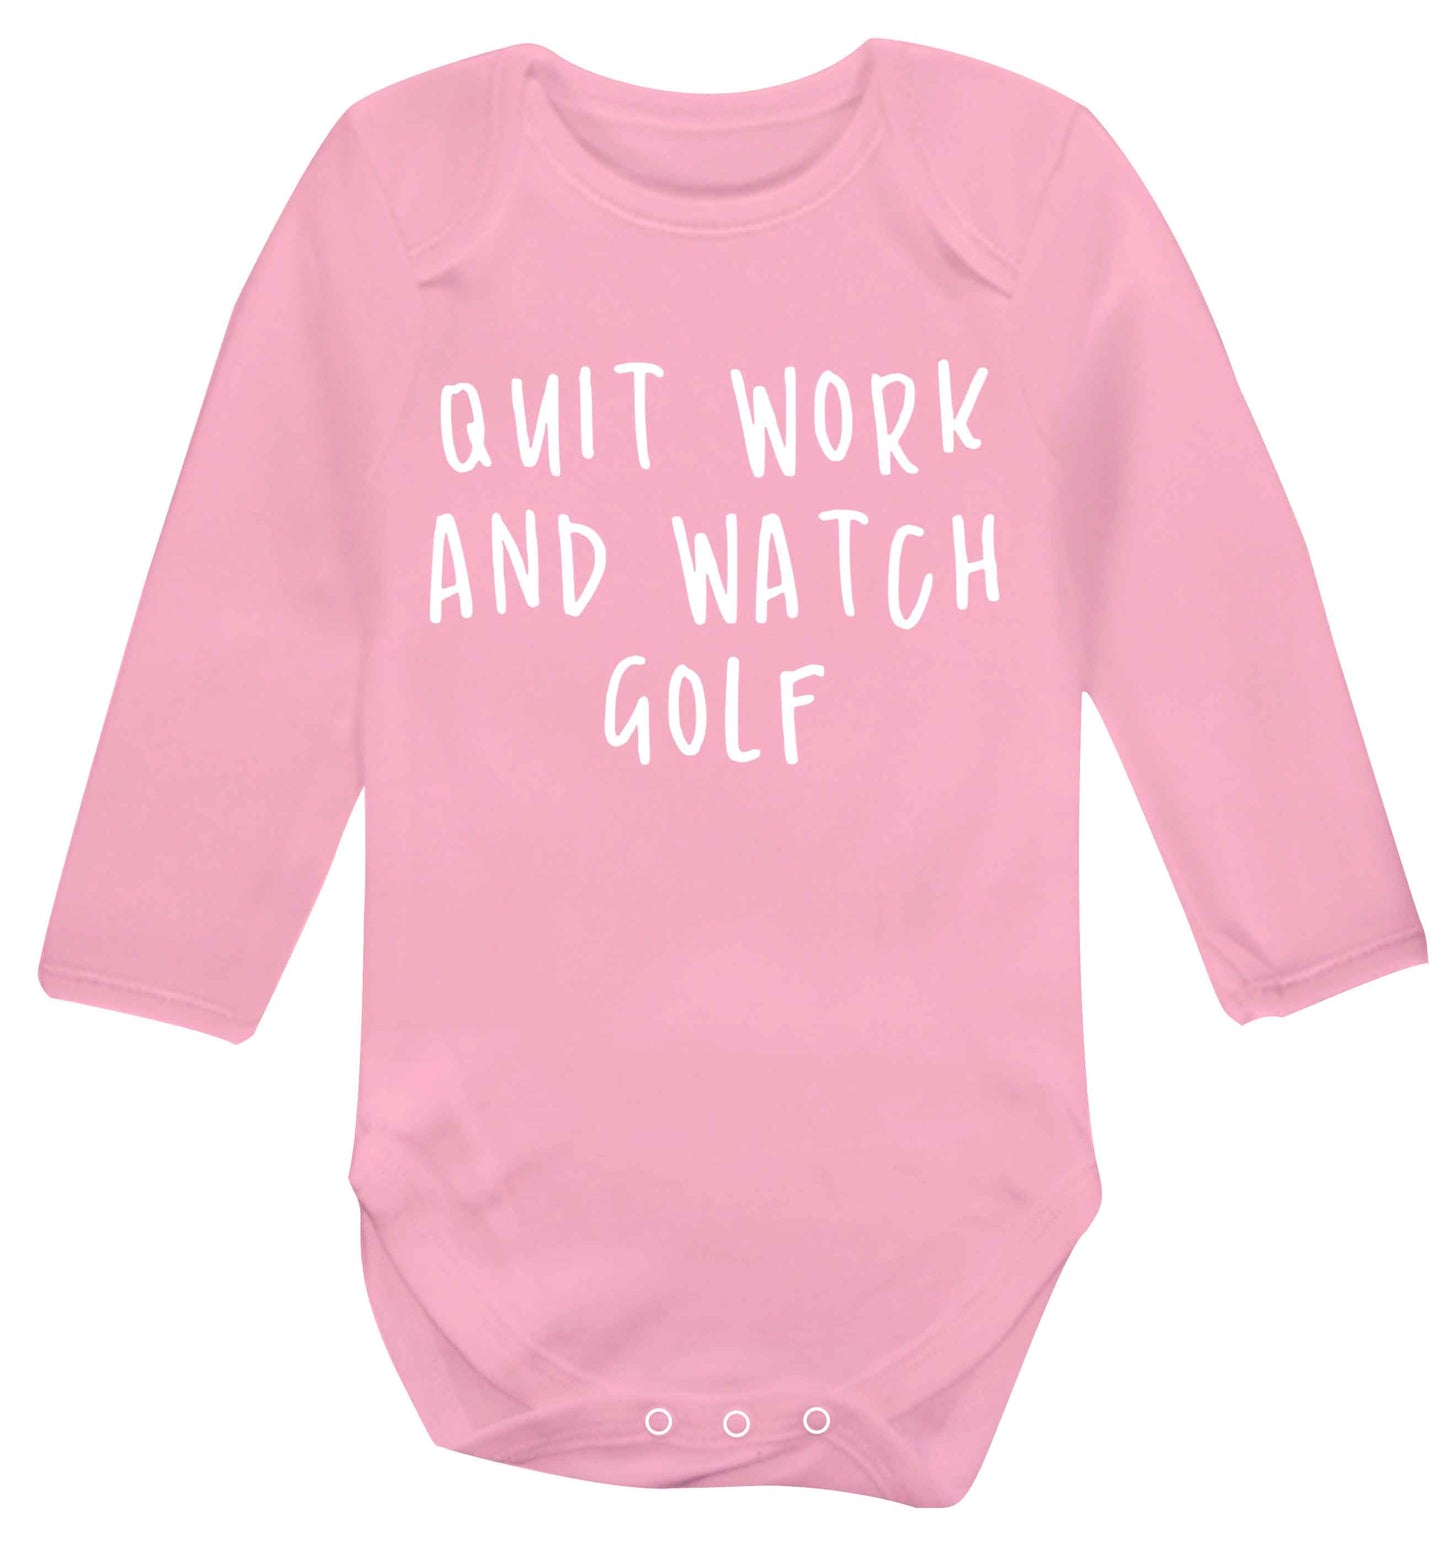 Quit work and watch golf Baby Vest long sleeved pale pink 6-12 months